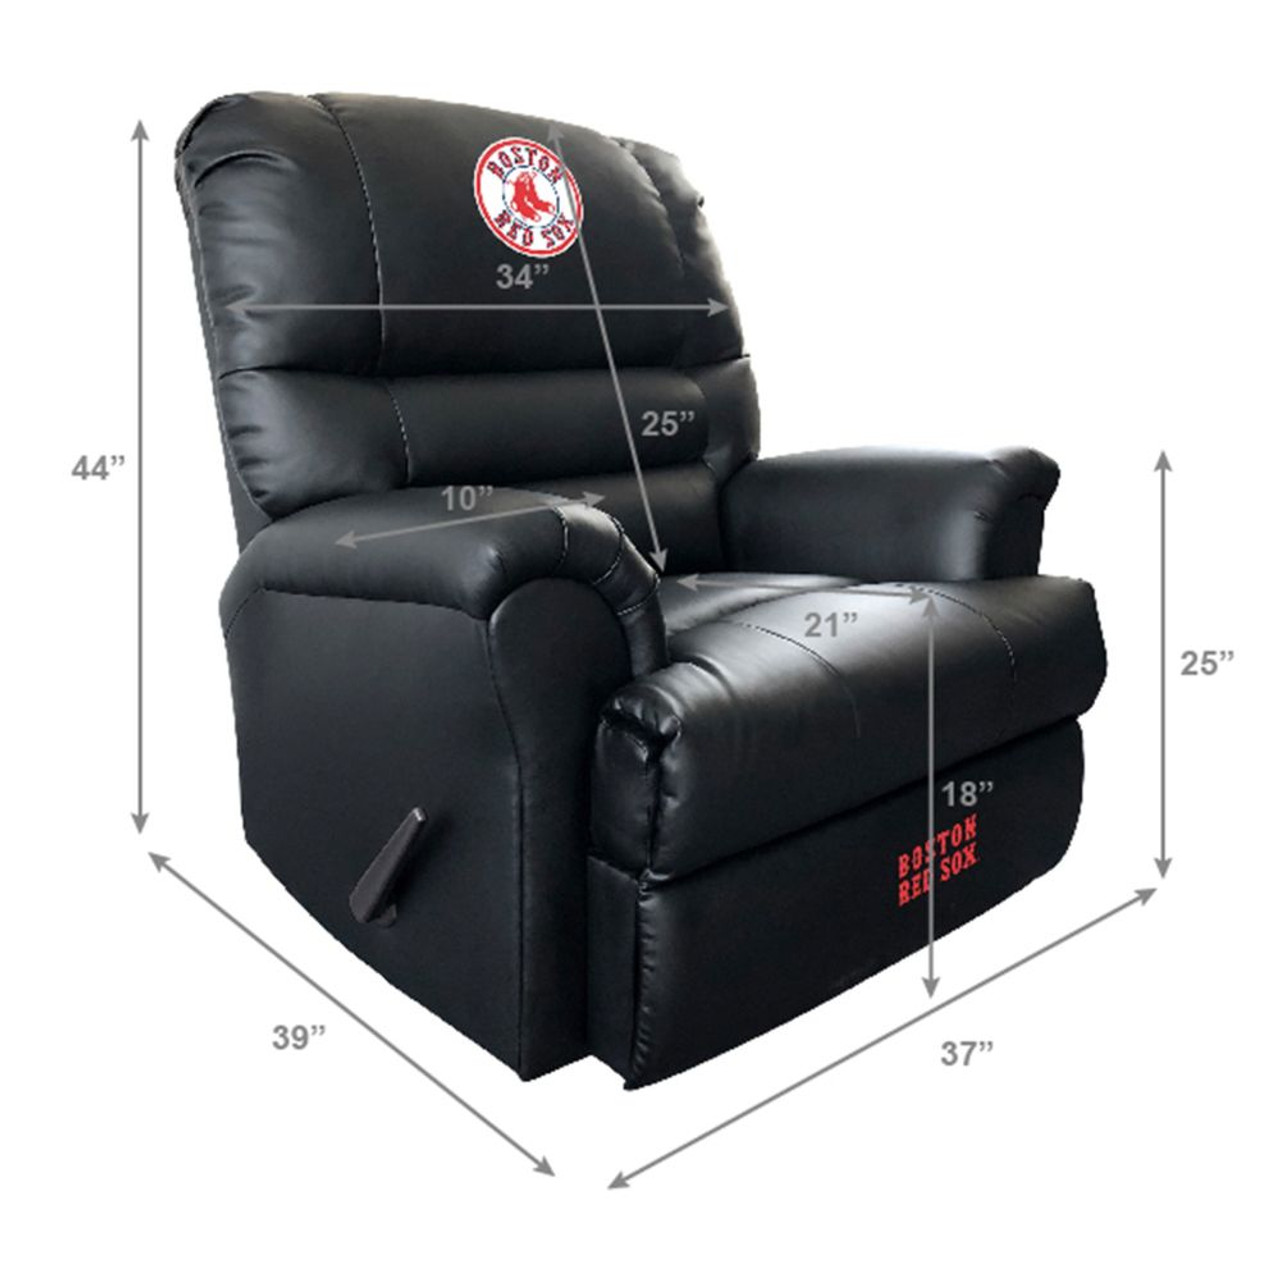 603-6003, 720801636030, Boston, Red Sox, BOS, Sports, Recliner, MLB, Imperial